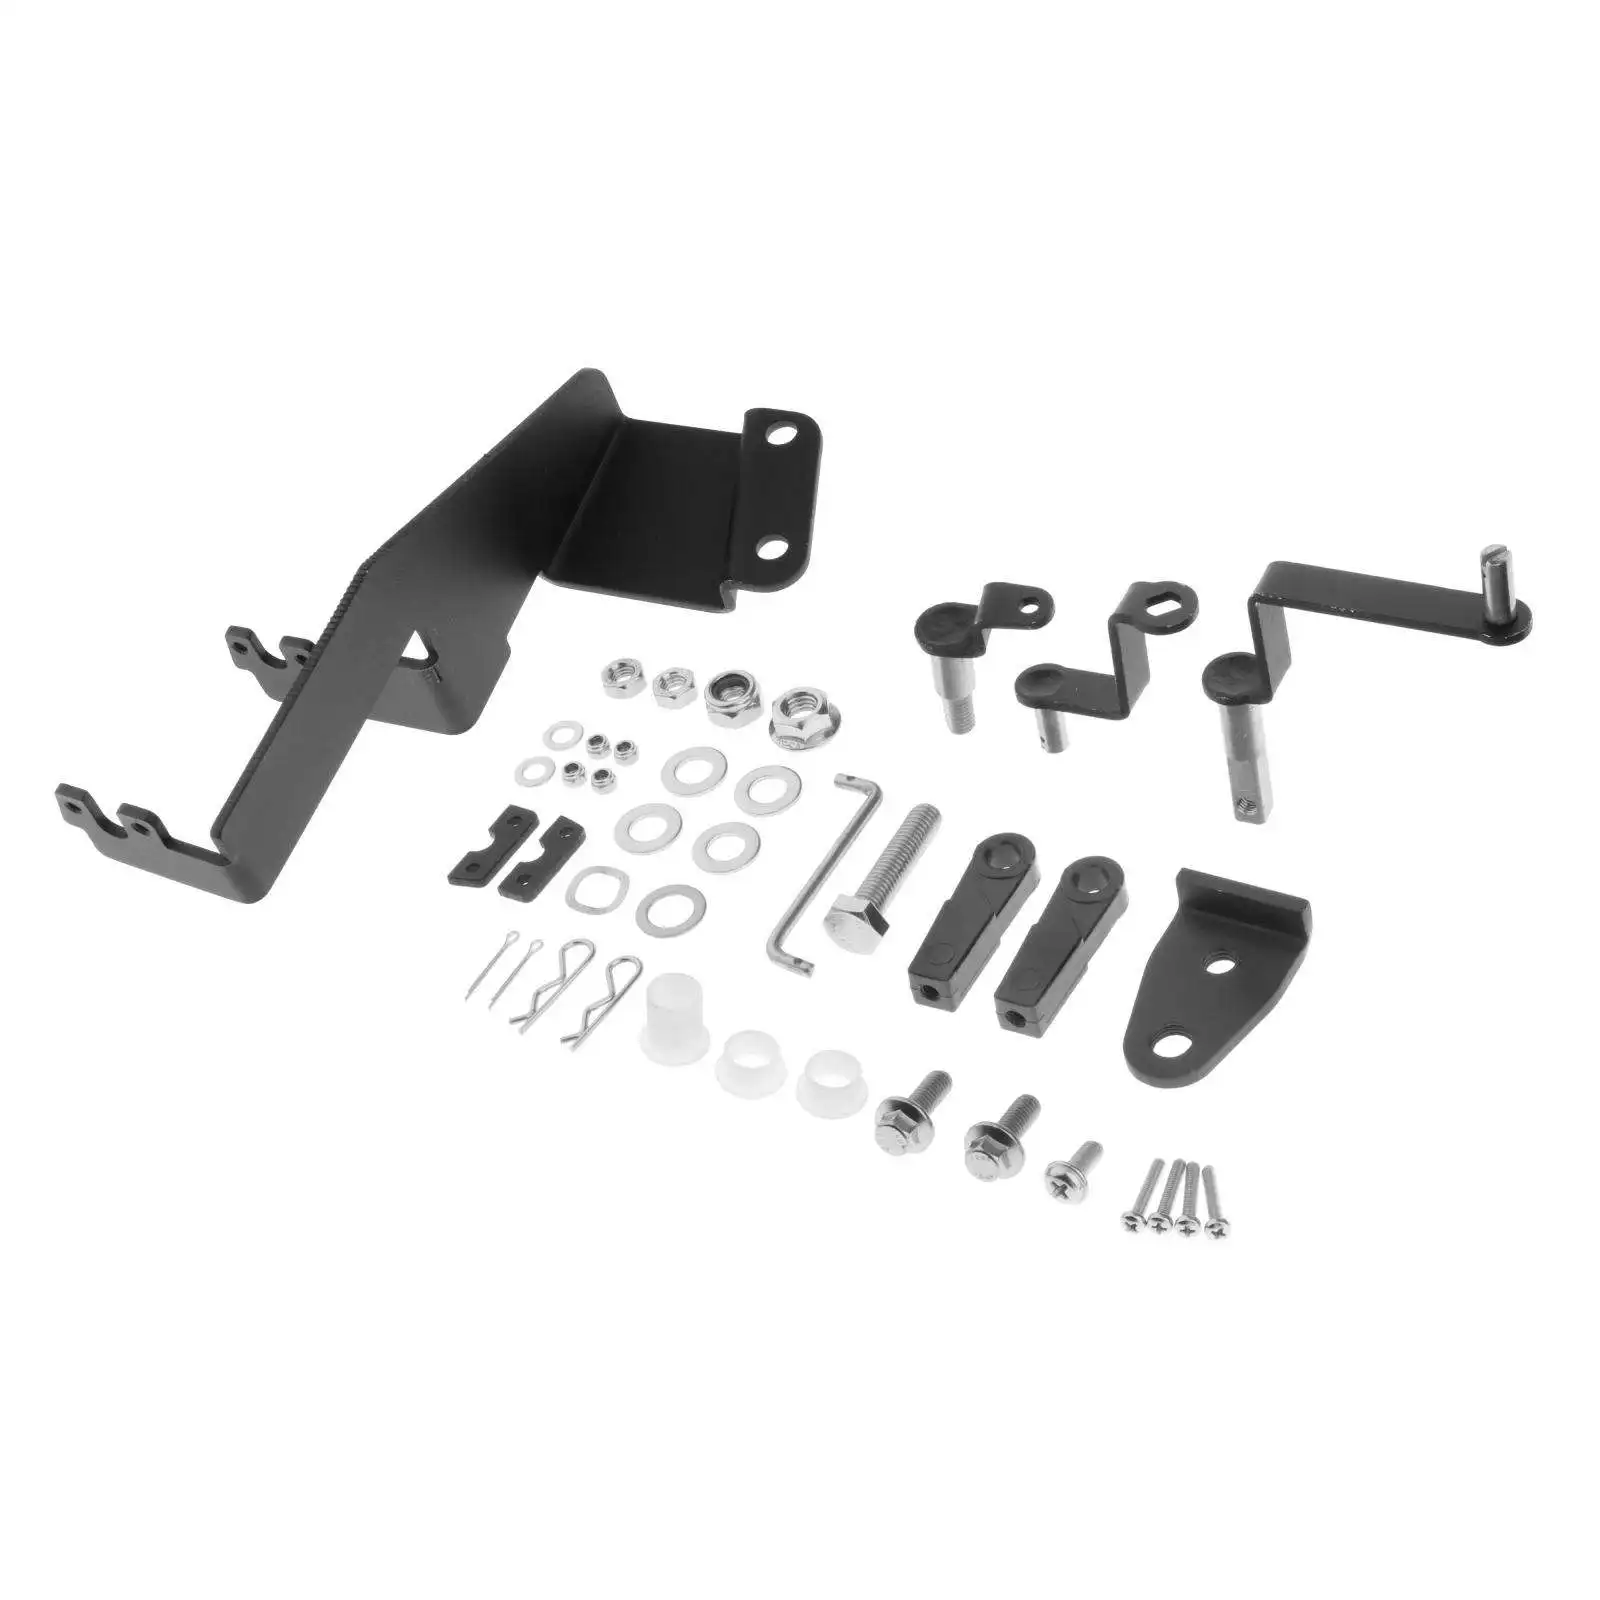 Metal Remote Control Attachment Kit For Yamaha Outboard 15HP Sea Pro